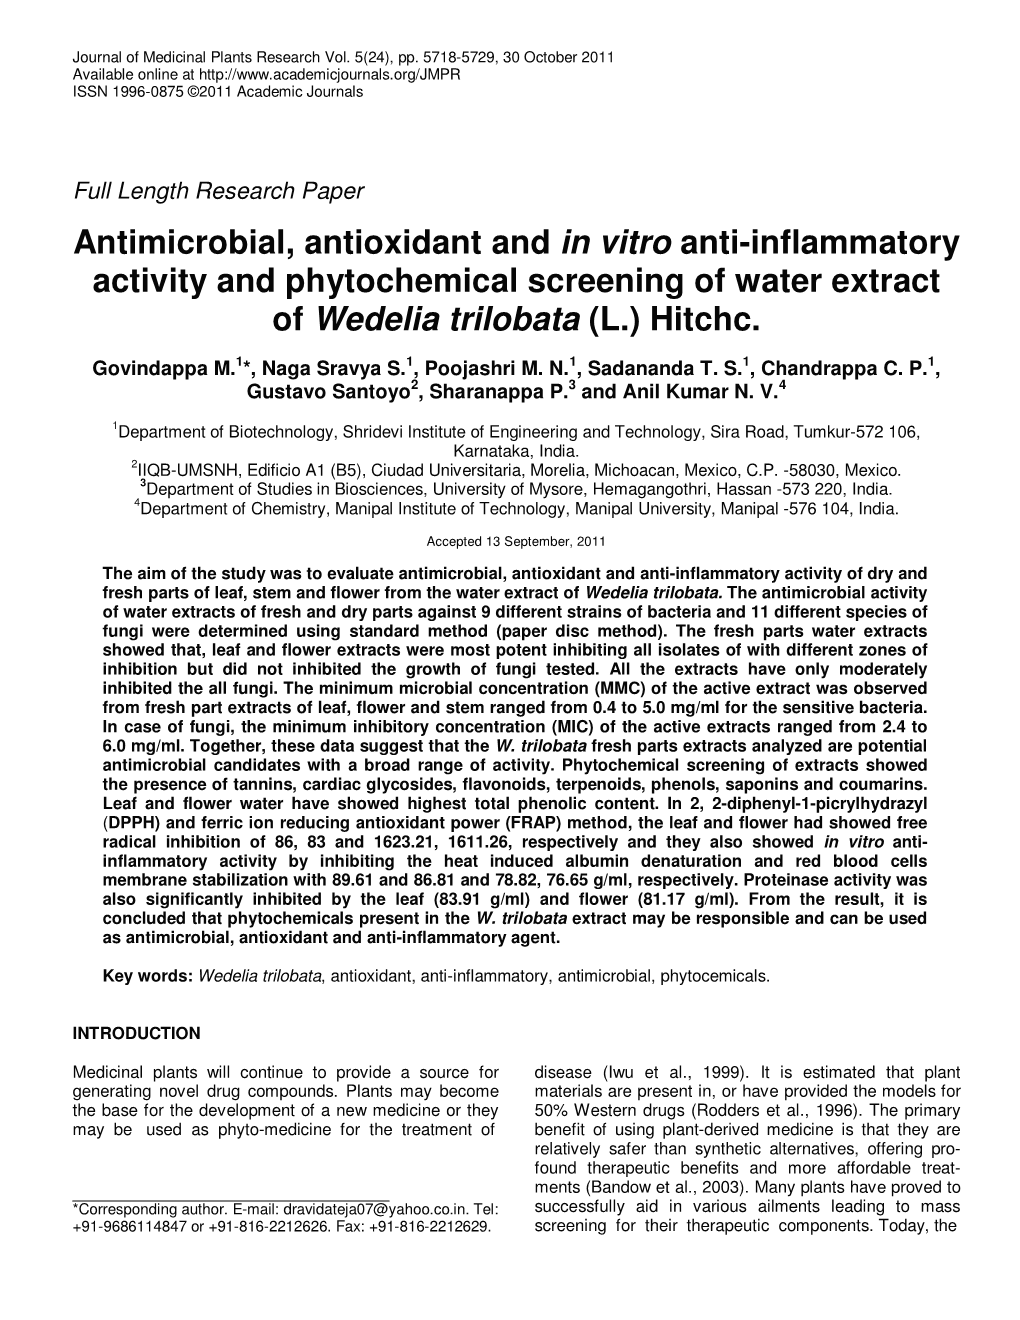 Antimicrobial, Antioxidant and in Vitro Anti-Inflammatory Activity and Phytochemical Screening of Water Extract of Wedelia Trilobata (L.) Hitchc